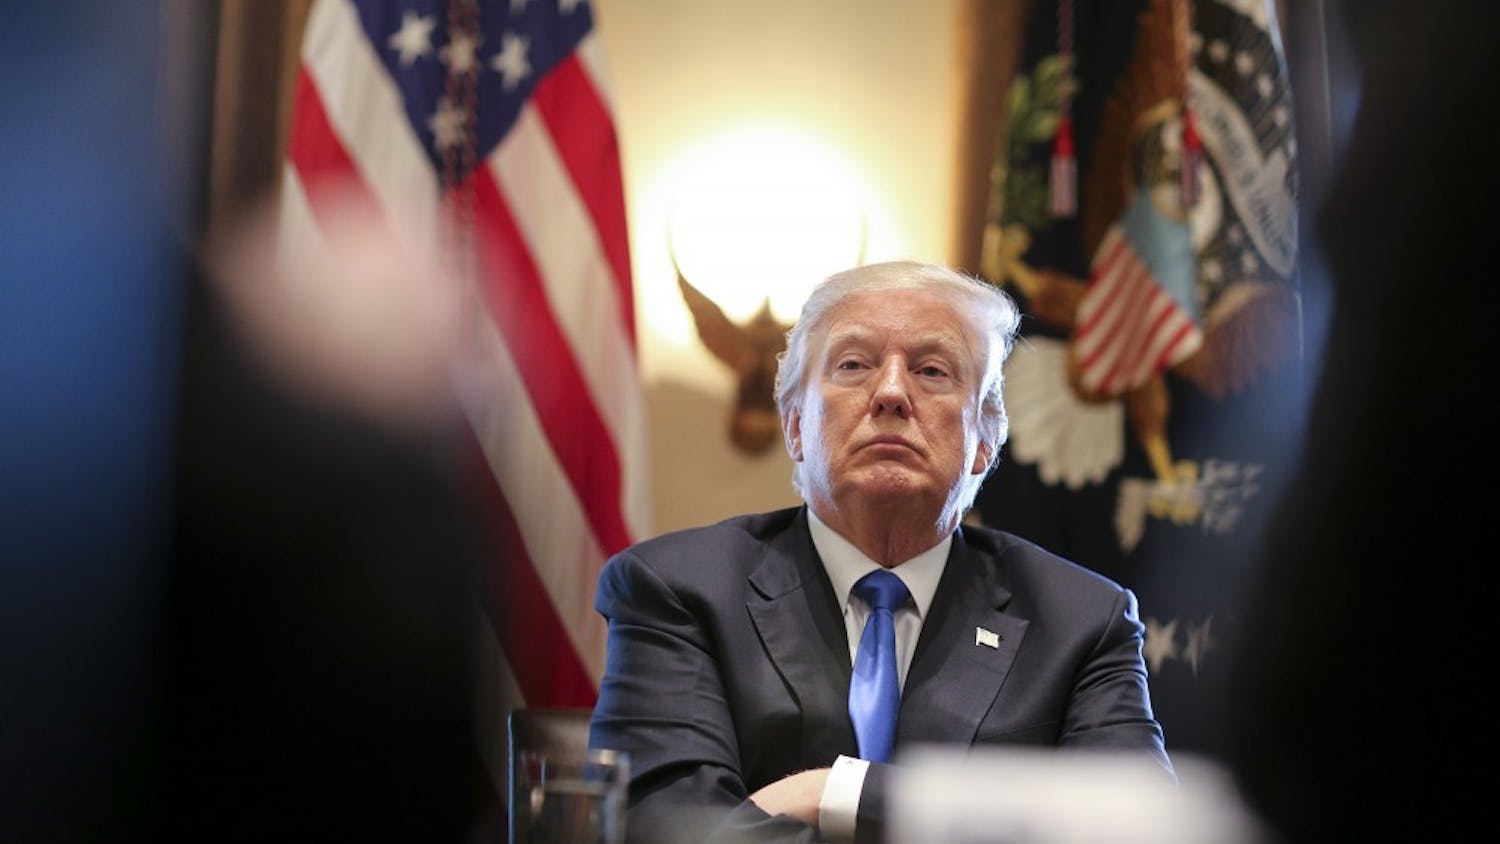 President Trump listens during a meeting with legislators on immigration reform in the Cabinet Room of the White House on Jan. 9, in Washington, D.C.